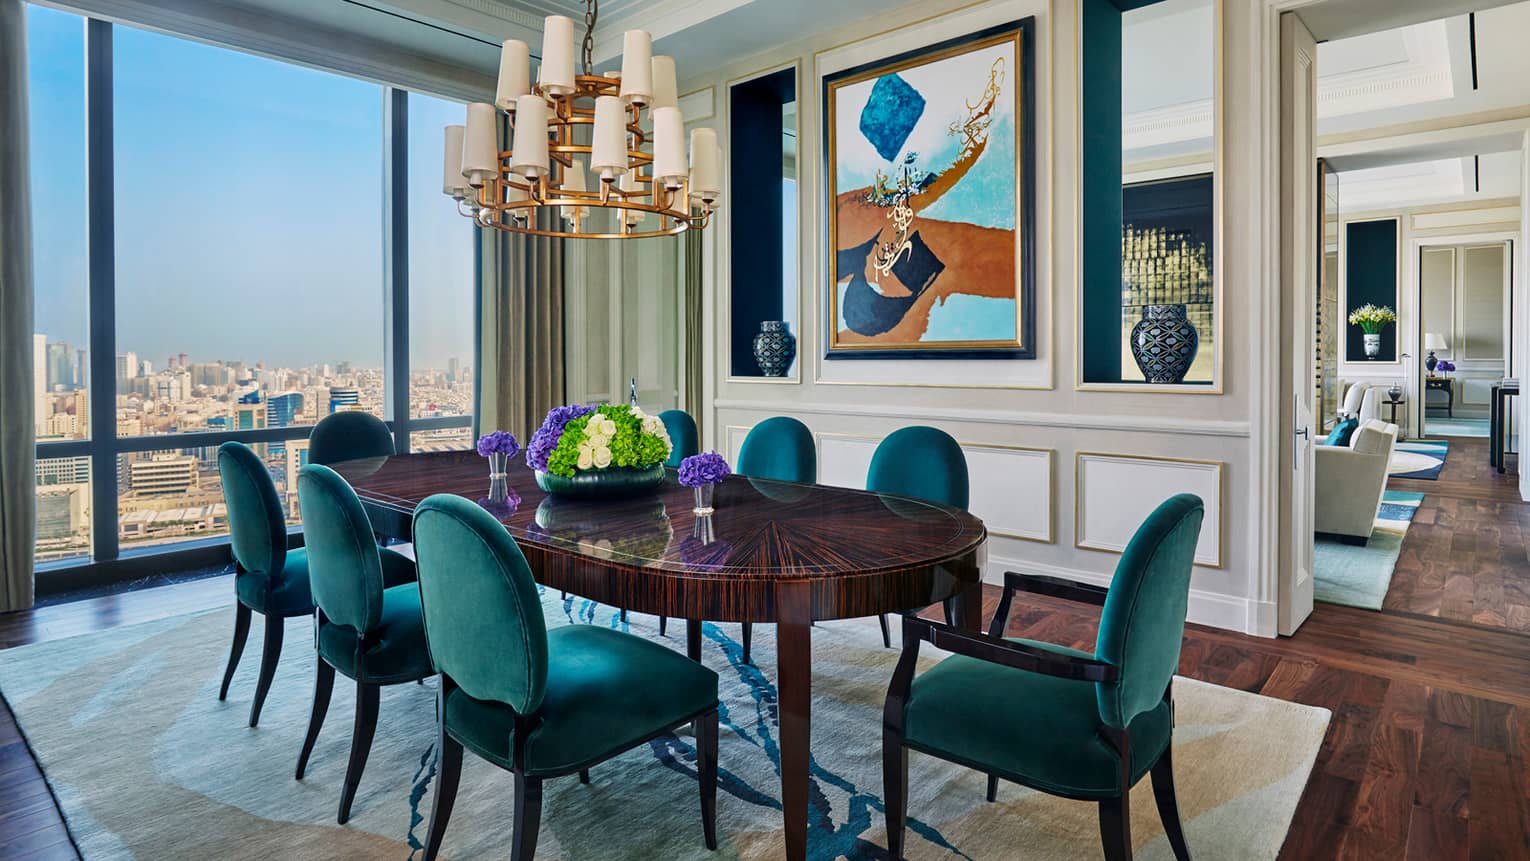 Hotel room 1930s-style 8-person dining room table with maritime green velvet chairs, chandelier, window with city view